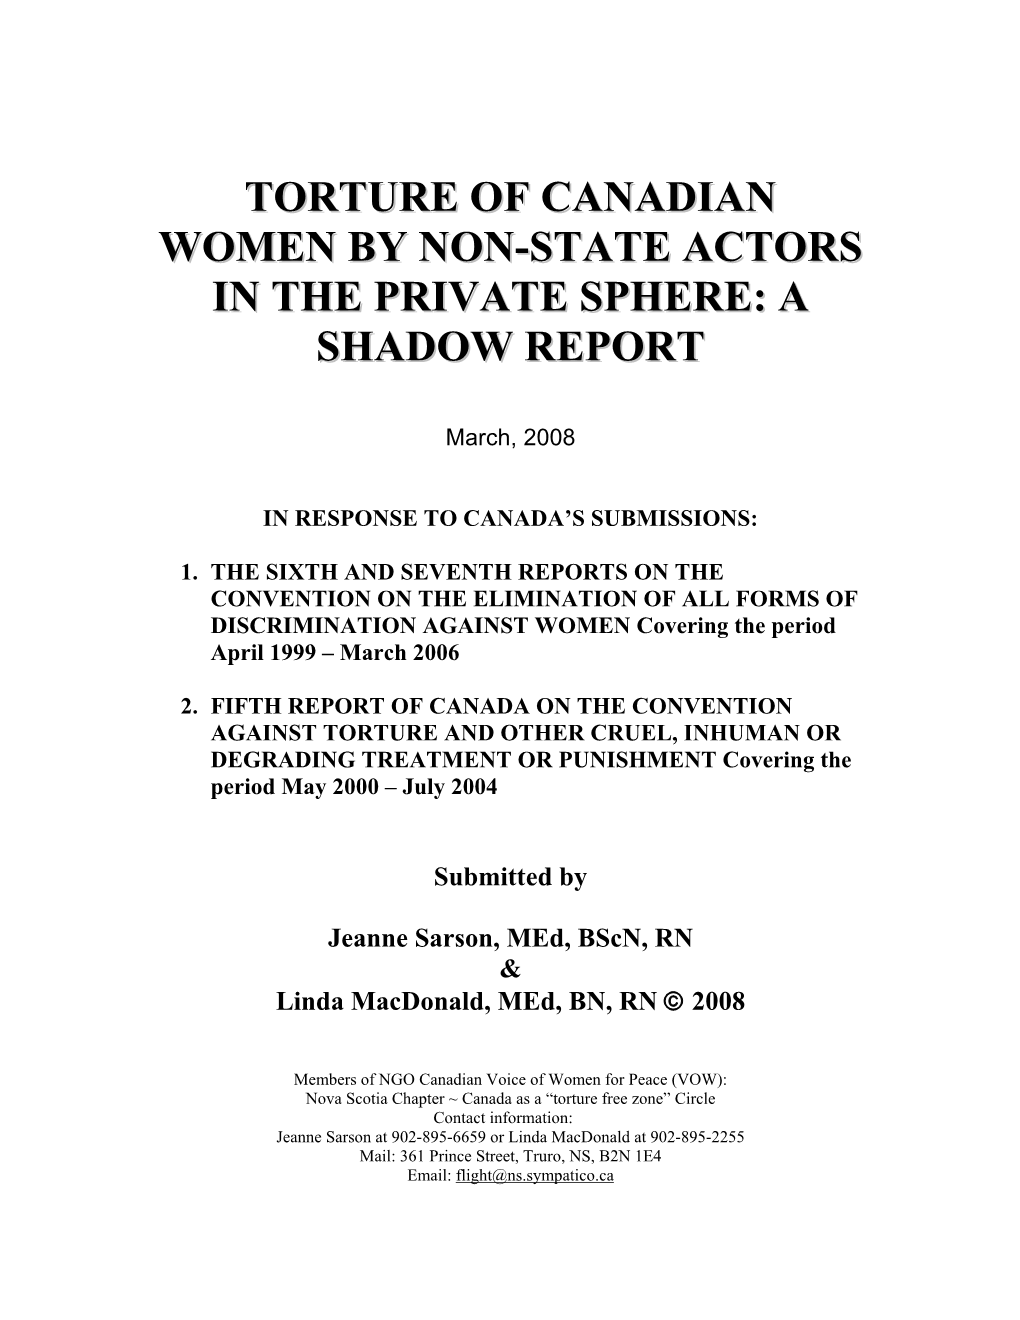 Torture of Canadian Women by Non-State Actors in the Private Sphere: a Shadow Report